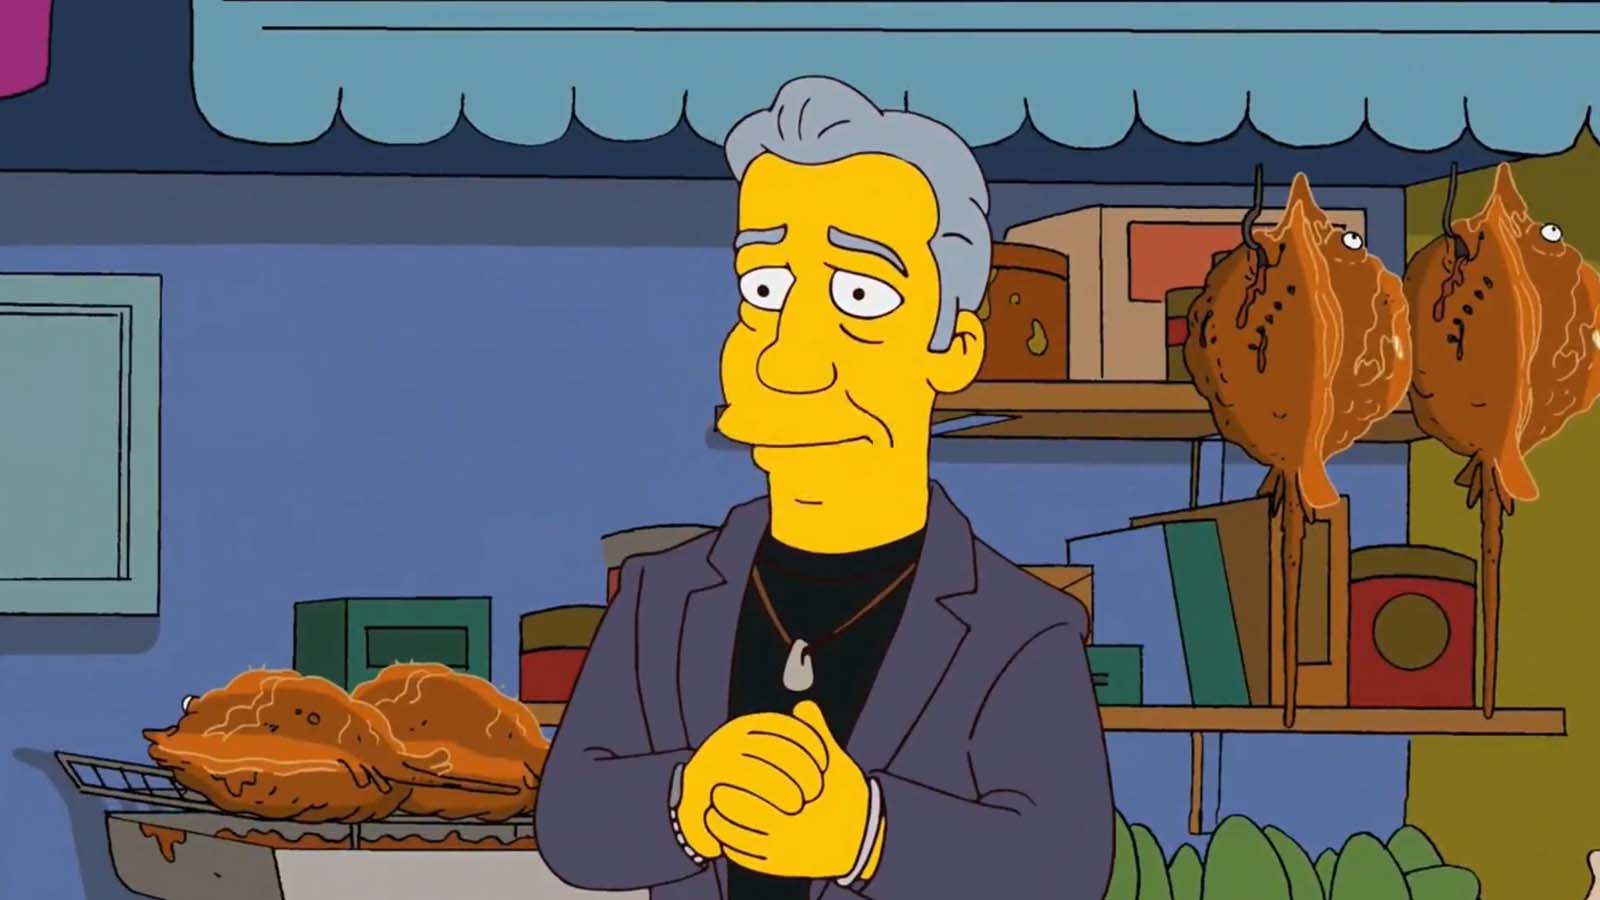 Bourdain was featured in The Simpsons. Image © Focus Features